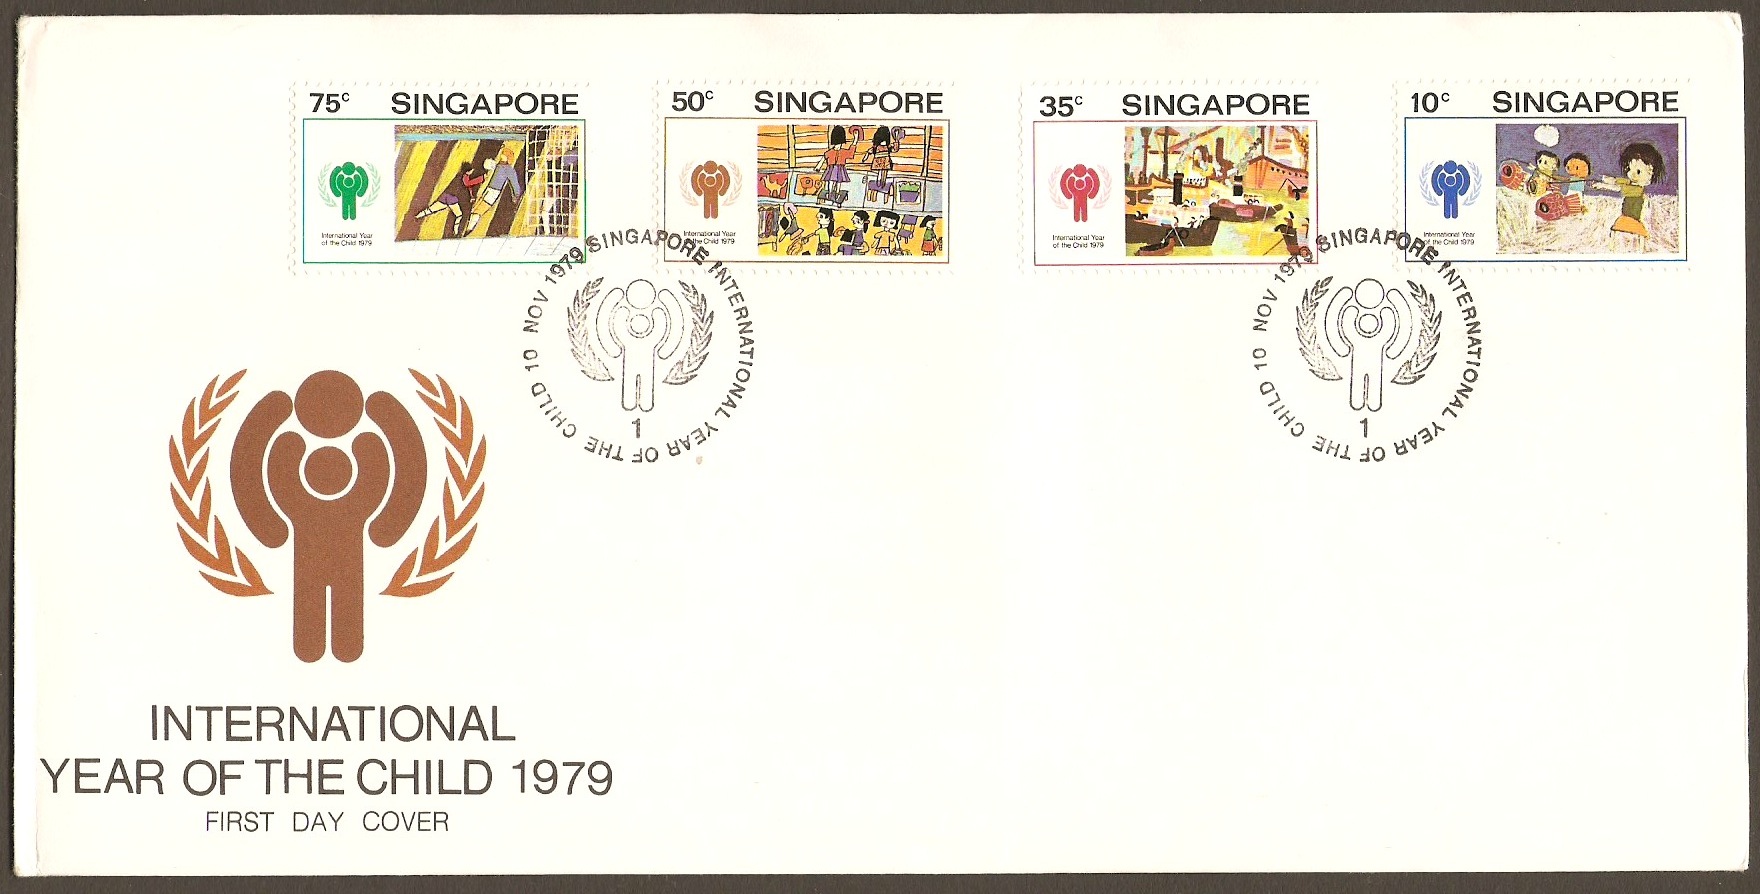 Singapore 1979 Year of the Child FDC.